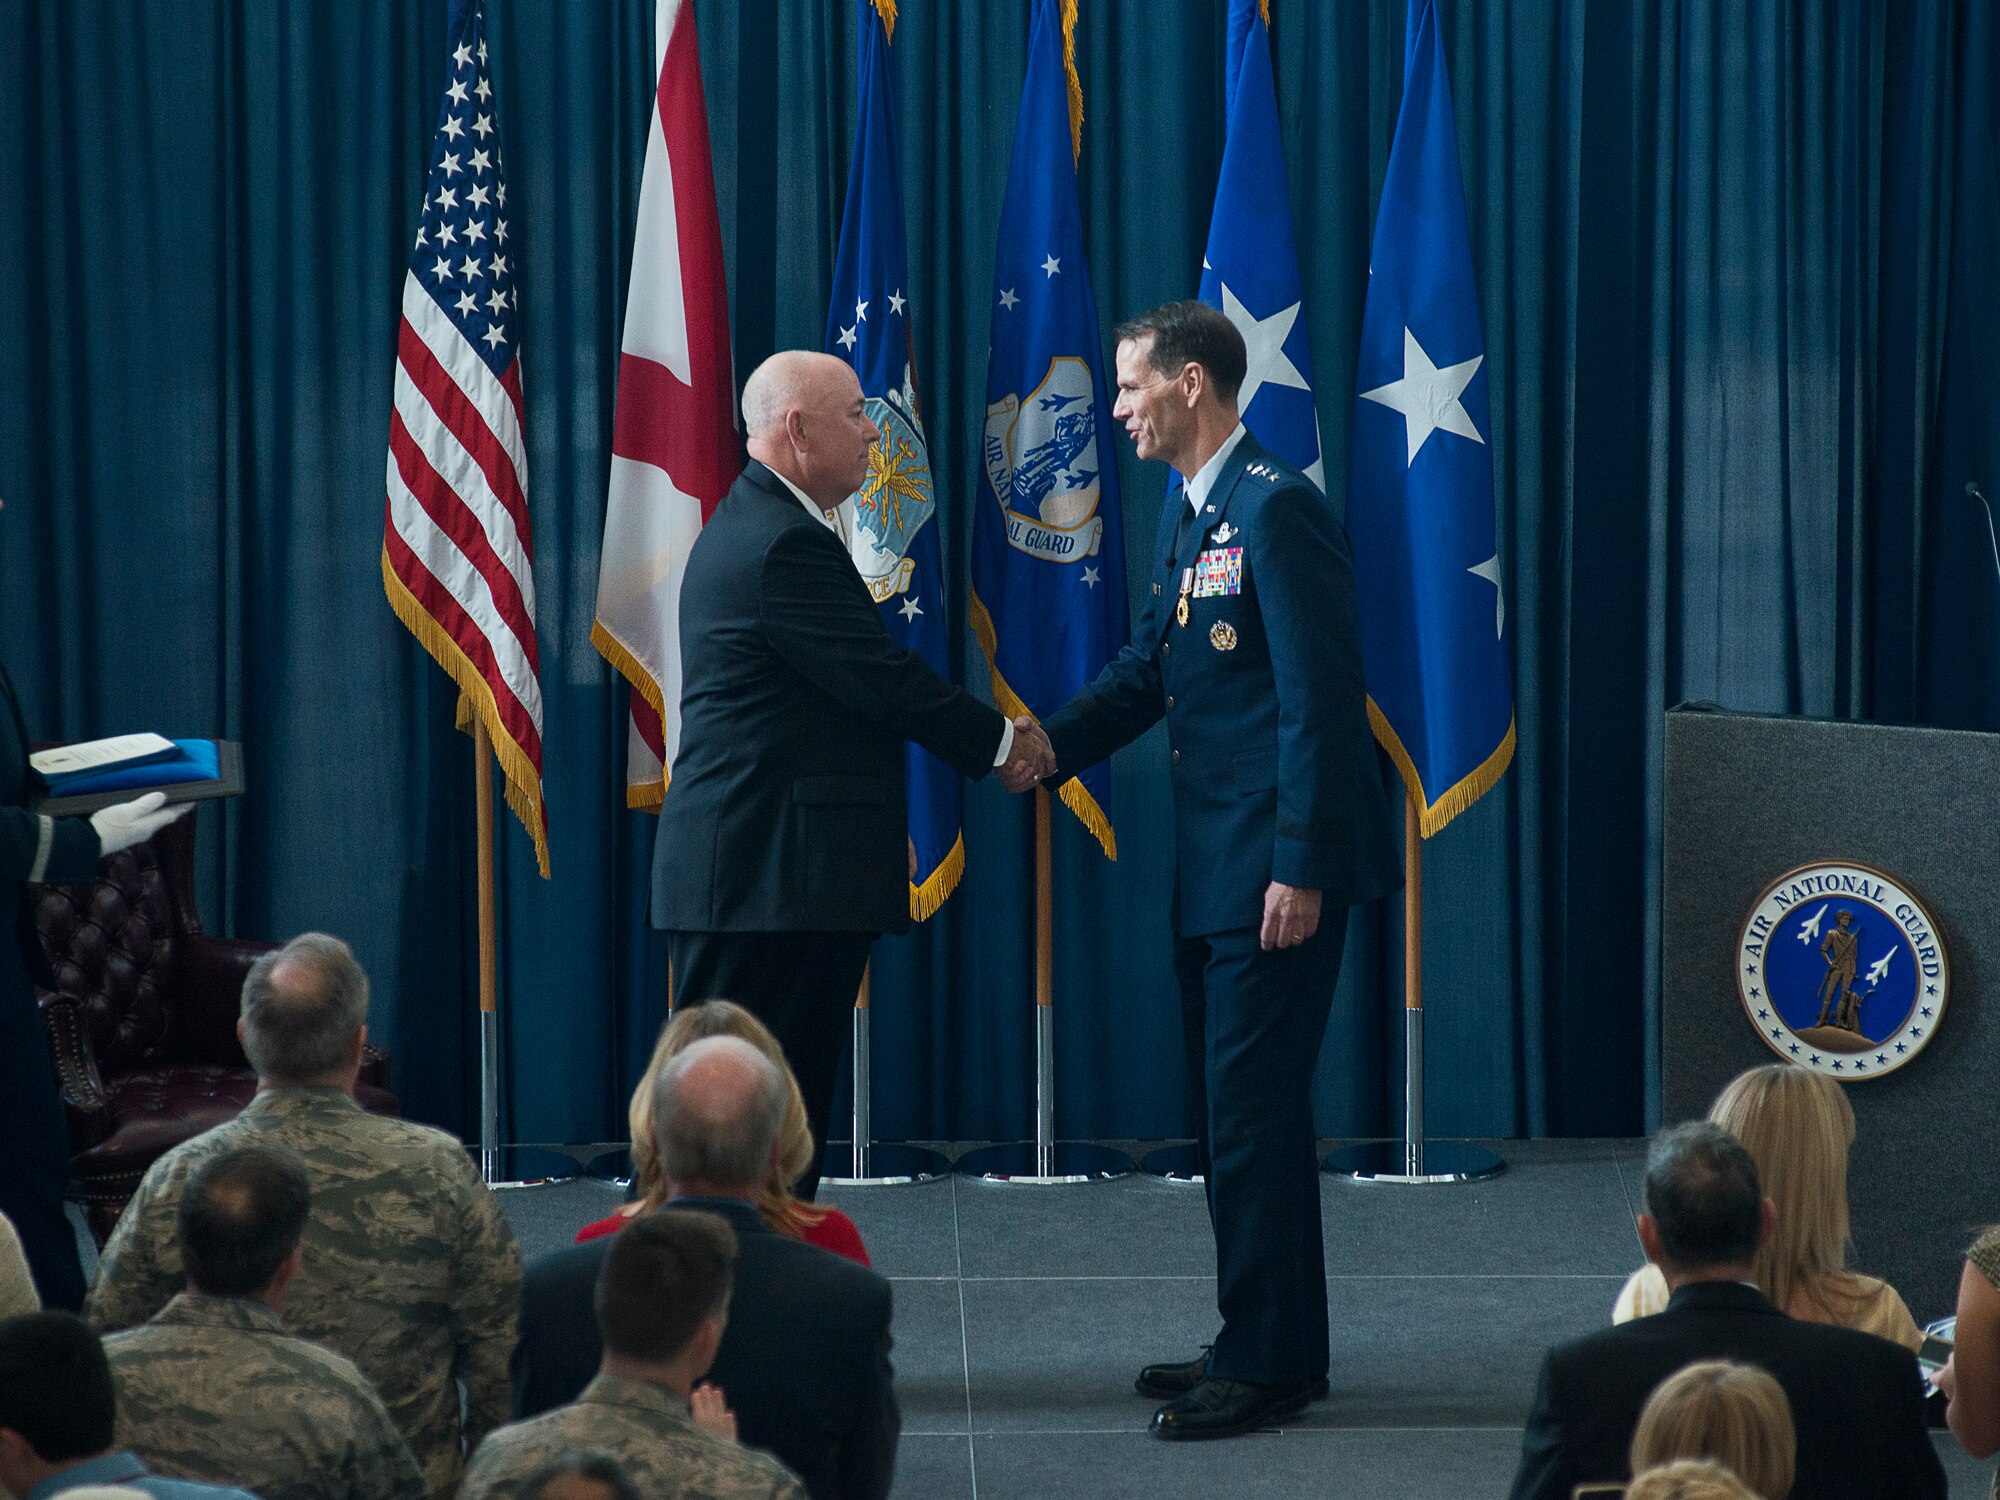 Retired General T. Michael Moseley, former Air Force chief of staff, and Lt. Gen. Stanley E. Clarke, III, Air National Guard director, exchange a handshake after Clarke is awarded the Legion of Merit during Clarke's retirement ceremony held at the Air National Guard Readiness Center on Joint Base Andrews, Md., December 18, 2015. Clarke is the 15th ANG director, and has served in that position since March, 2013. (U.S. Air National Guard photo by Staff Sgt. John E. Hillier/Released)